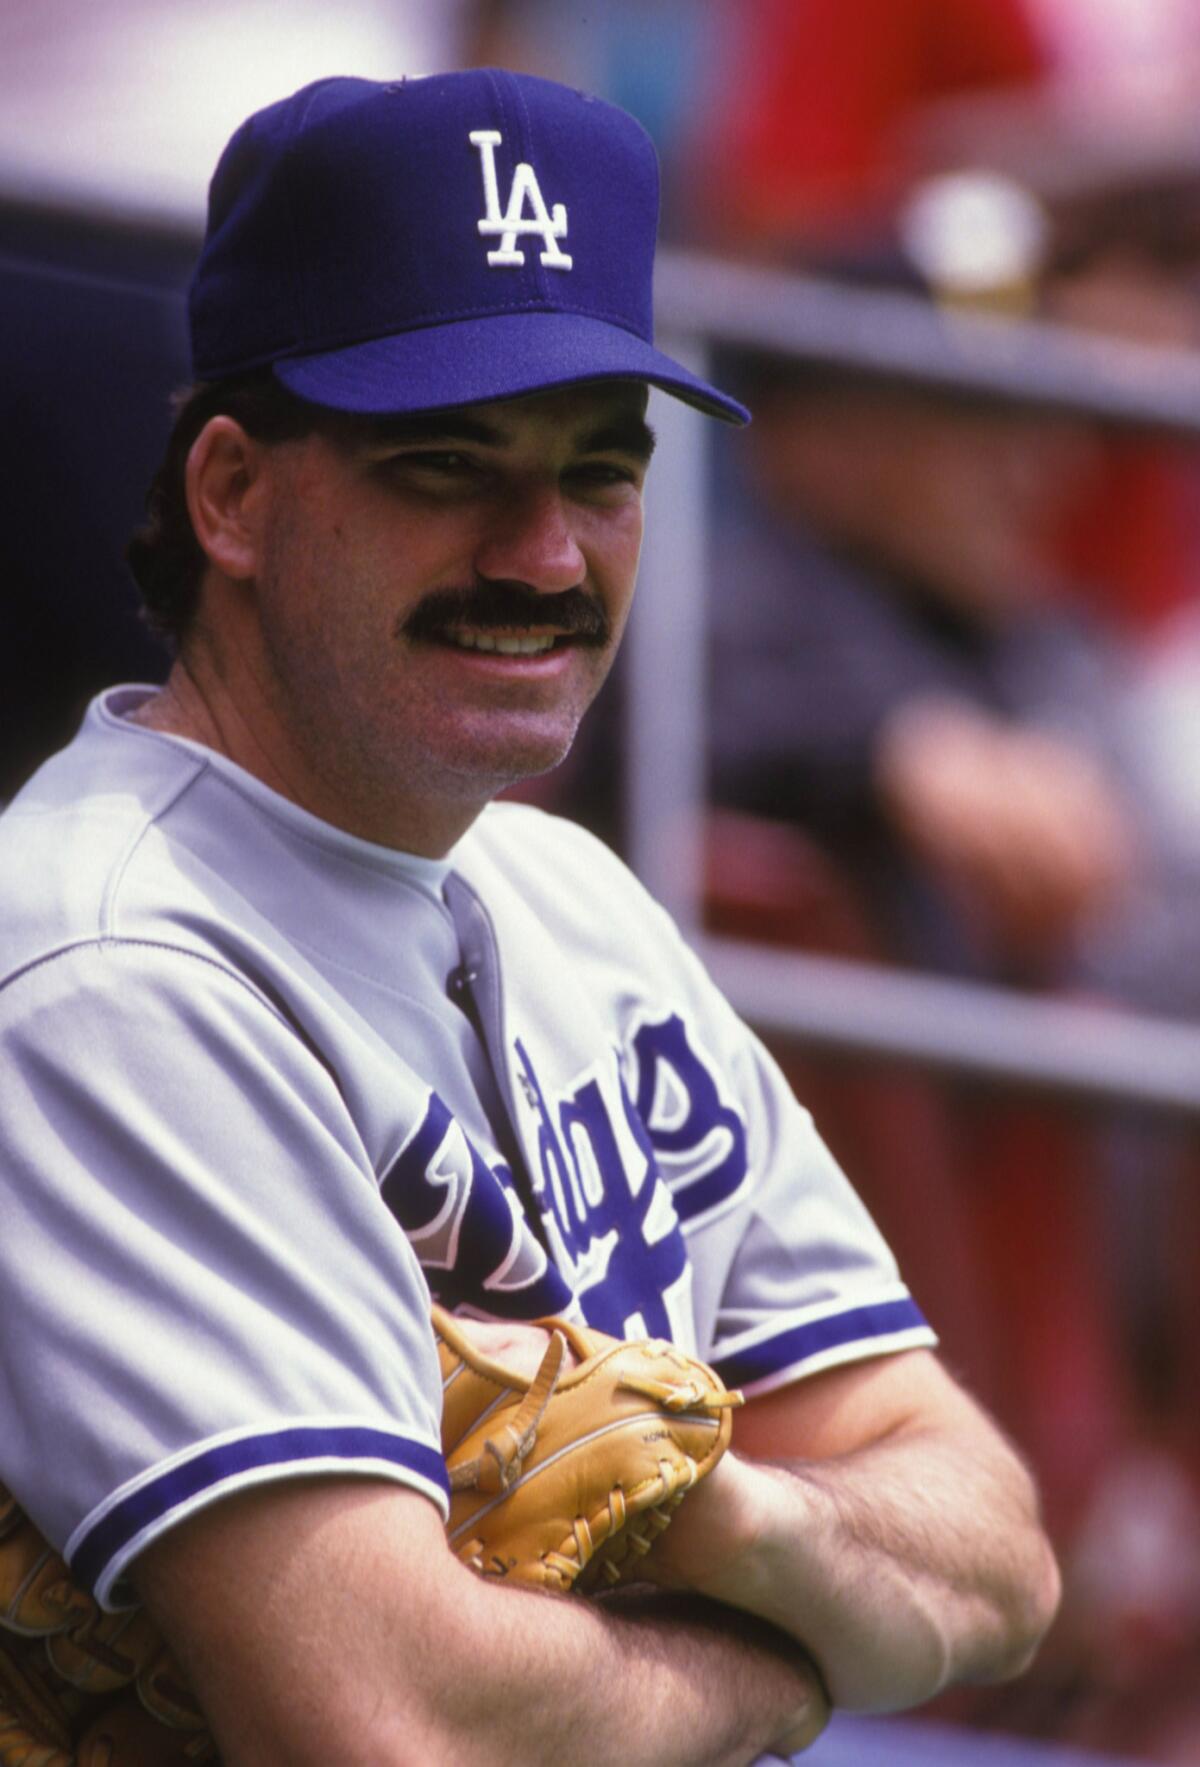 PHILADELPHIA, PA - JUNE 1: Tim Crews #52 of the Los Angeles Dodgers before a baseball game against the Philadelphia Phillies on June 1, 1992 at Veterans Stadium in Philadelphia, Pennsylvania. (Photo by Mitchell Layton/Getty Images) ** TCN OUT **